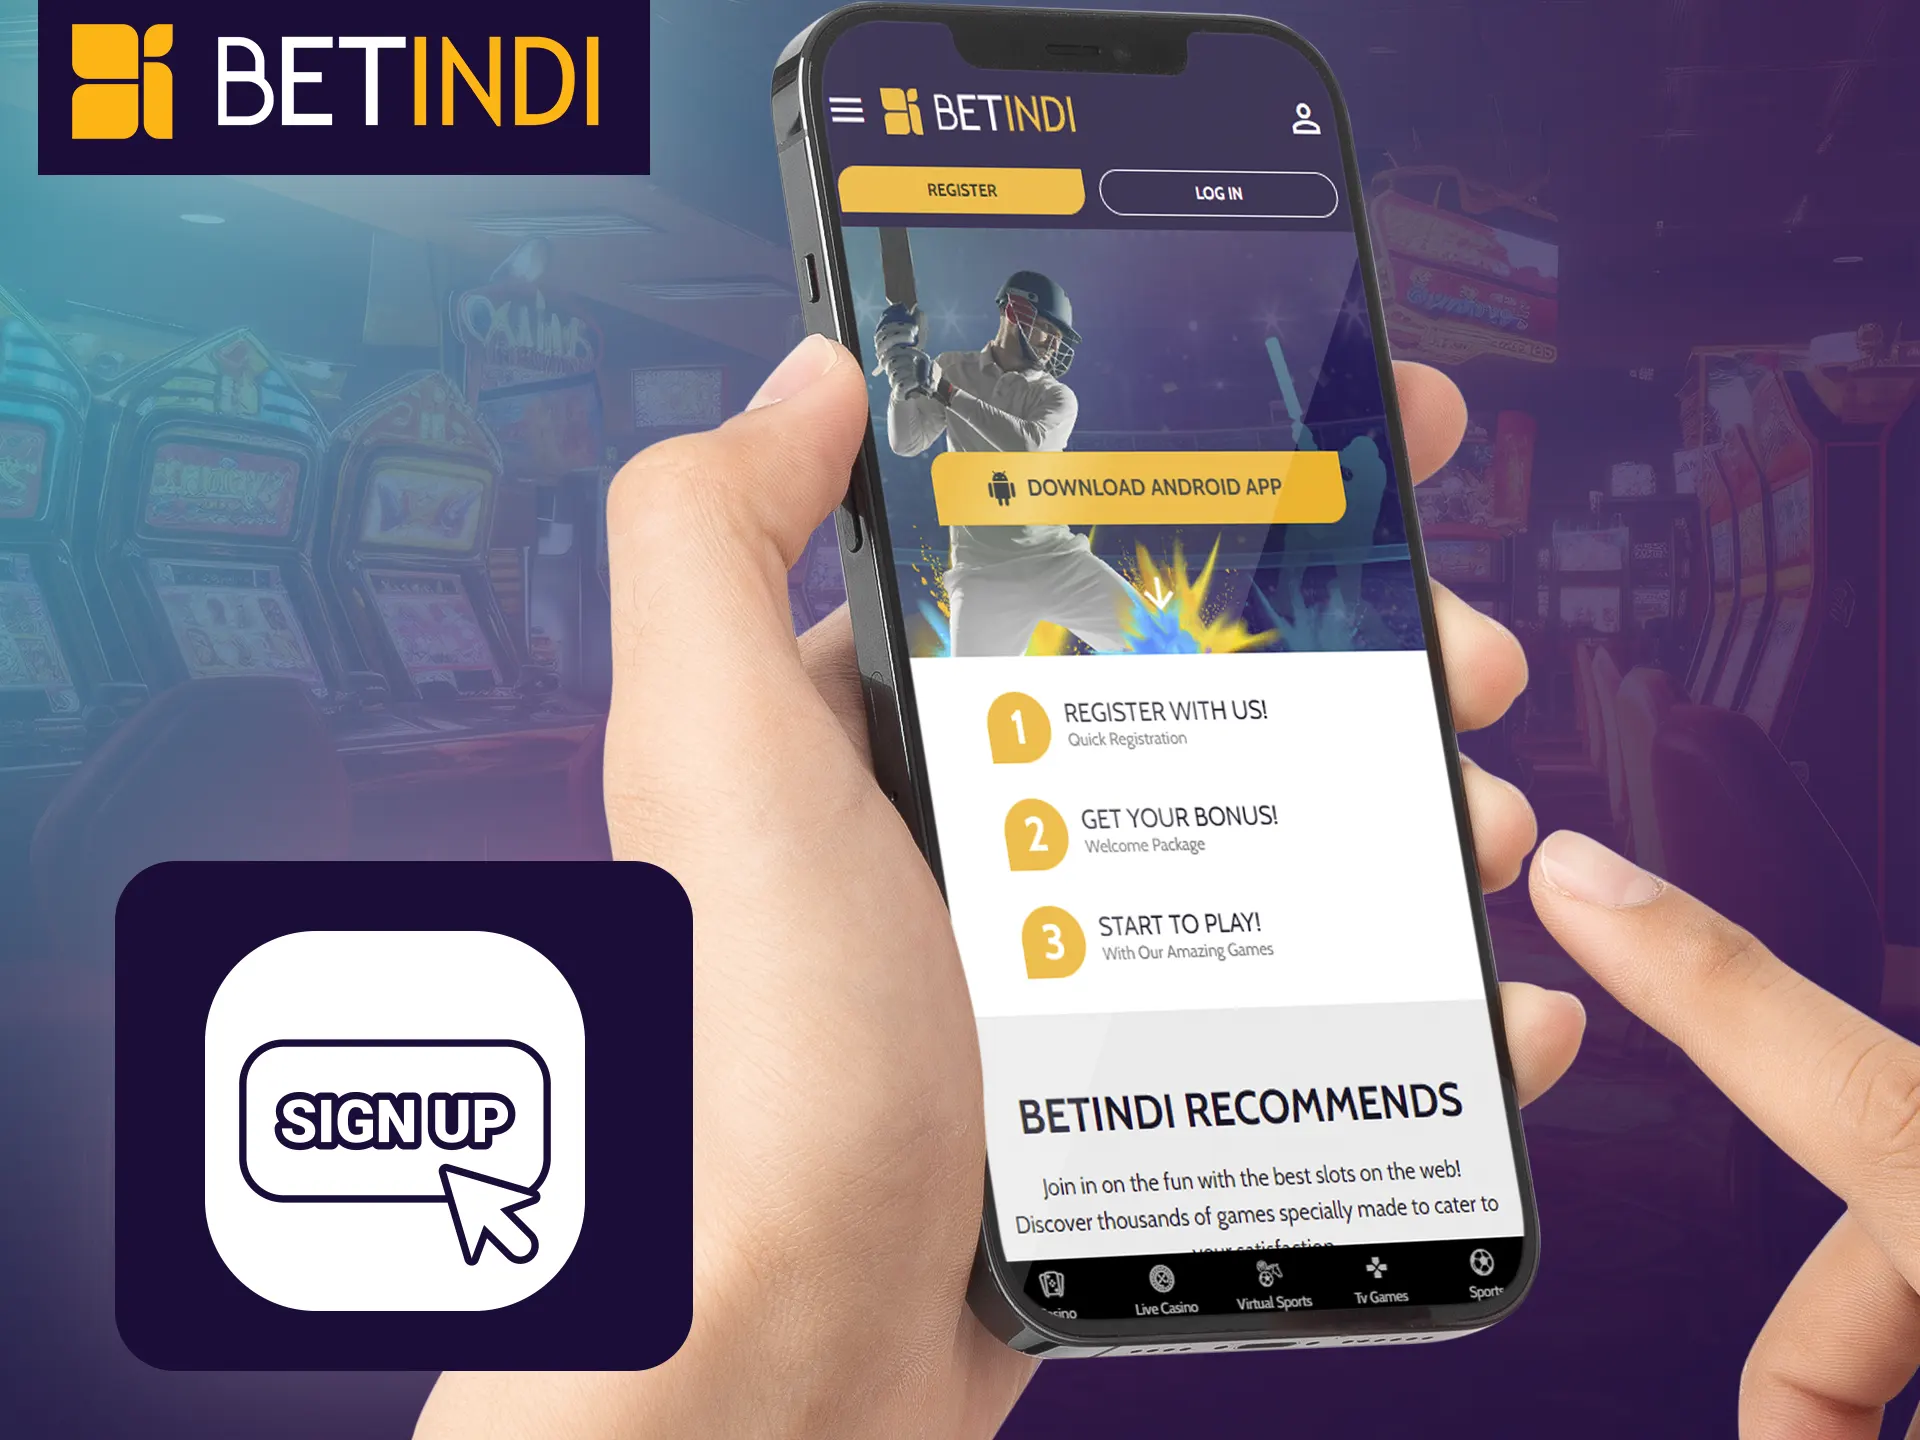 Sign up on Betindi app for exclusive benefits.